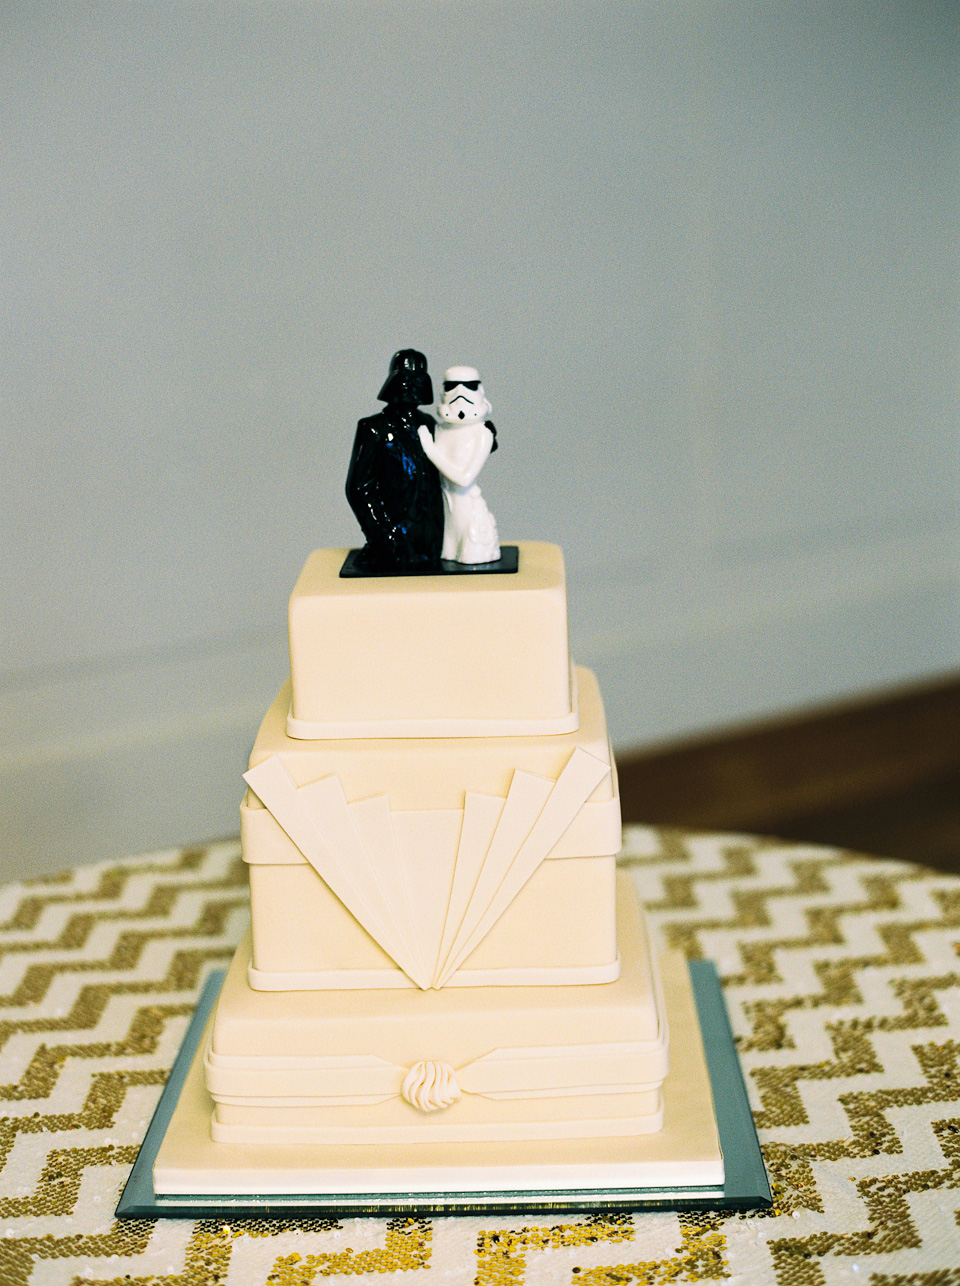 A 1930's Art Deco inspired wedding at The Assembly Rooms in London. Images shot on 35mm film by Peachey Photography.